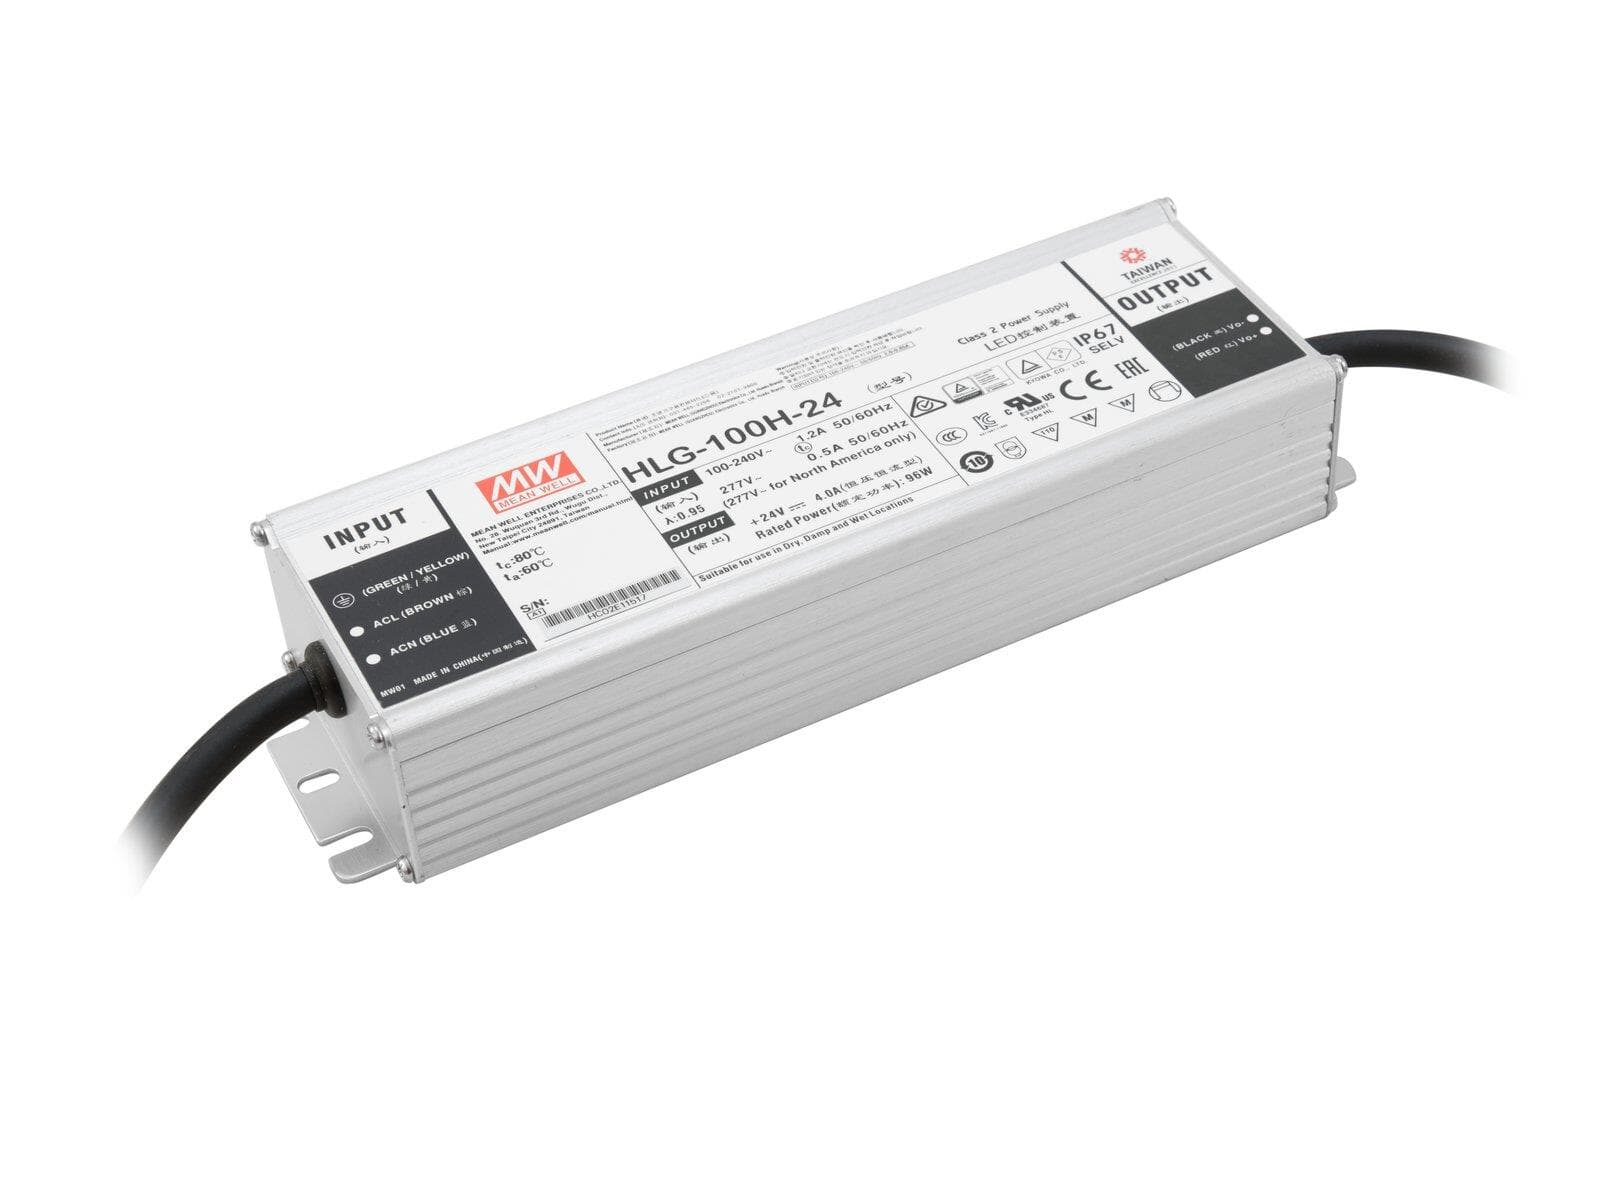 Mean Well Waterproof LED Power Supply 192W - 12VDC